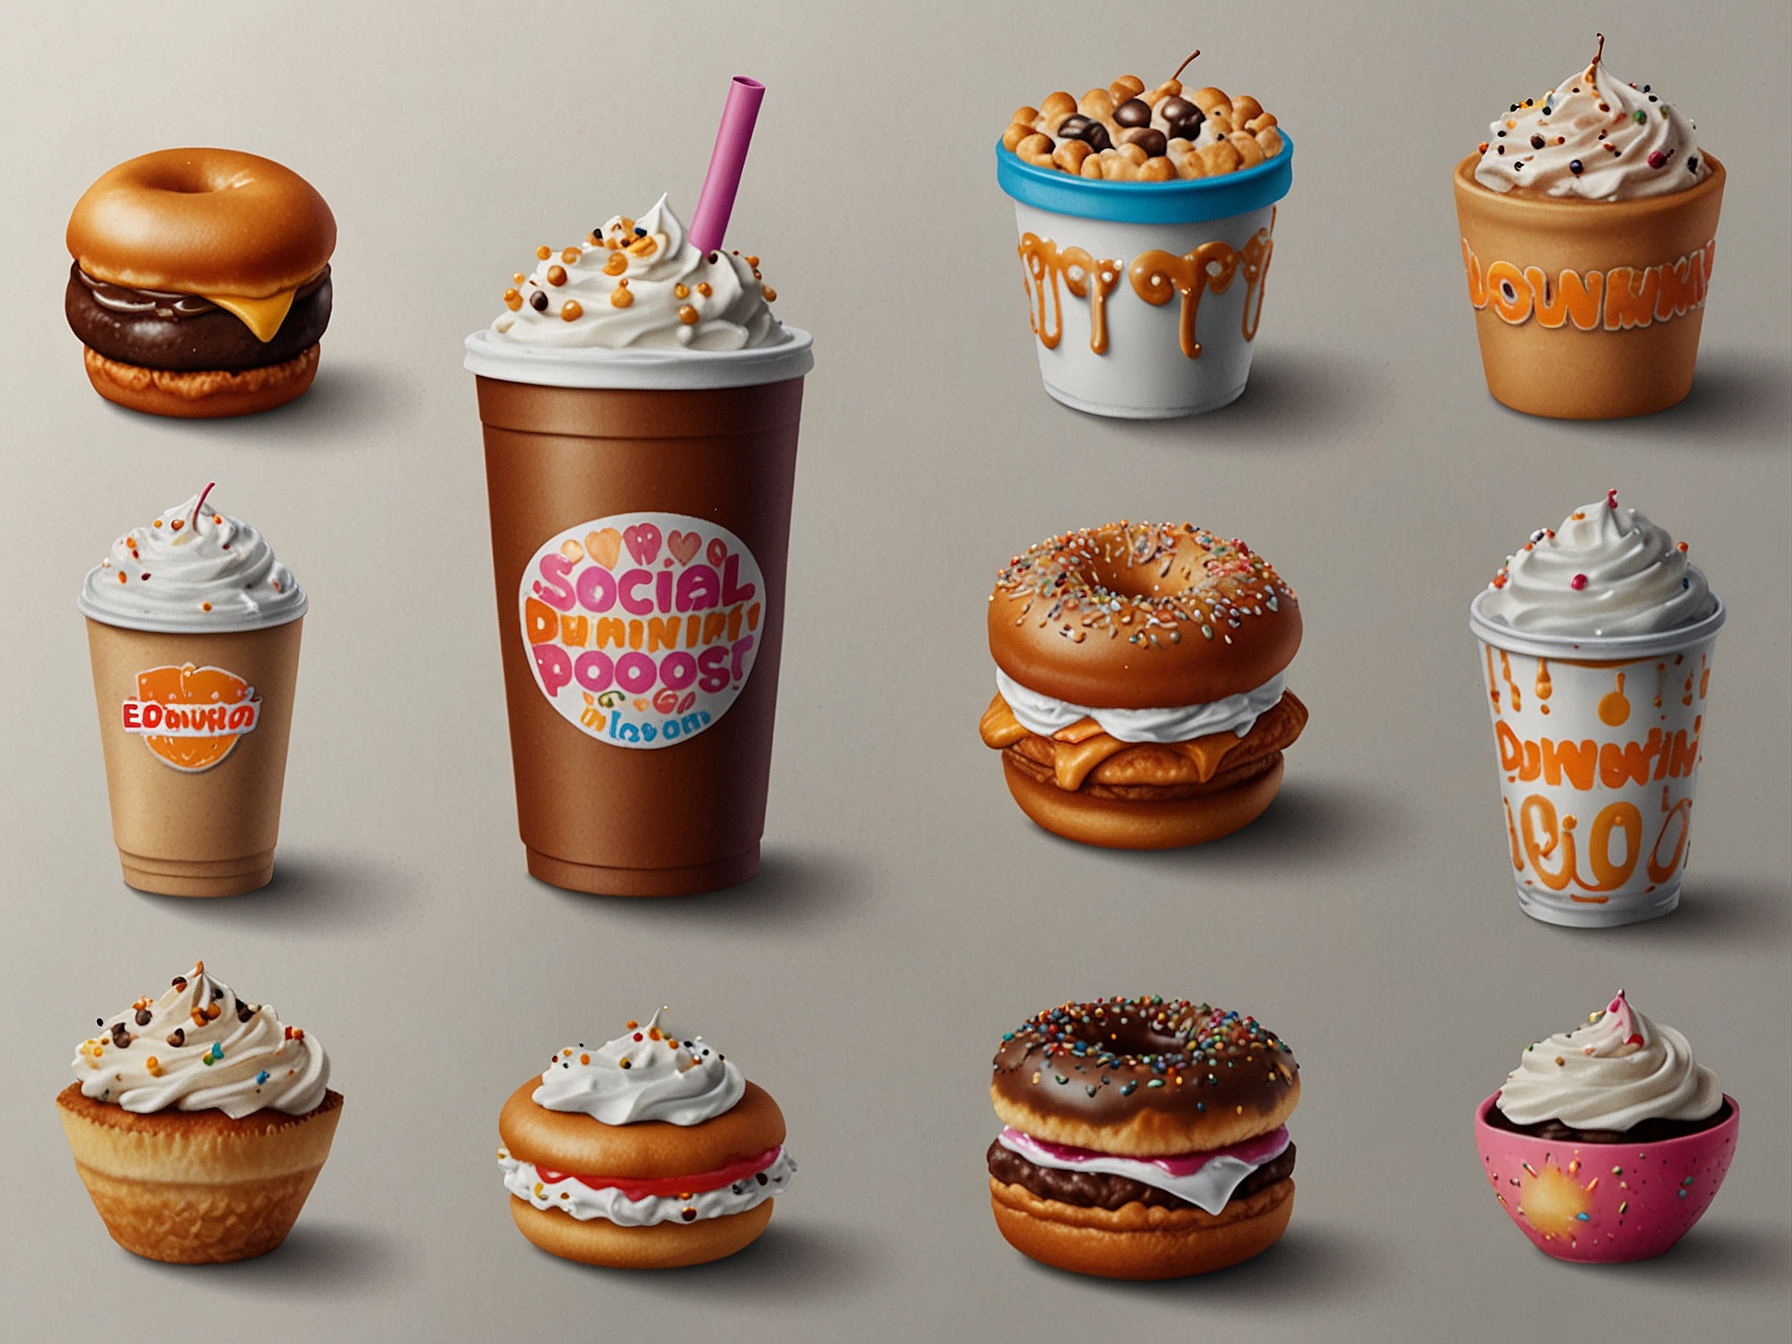 Screenshots of social media posts where Dunkin' enthusiasts compare and analyze different logo designs, speculating about hidden messages or strategies behind these variations.